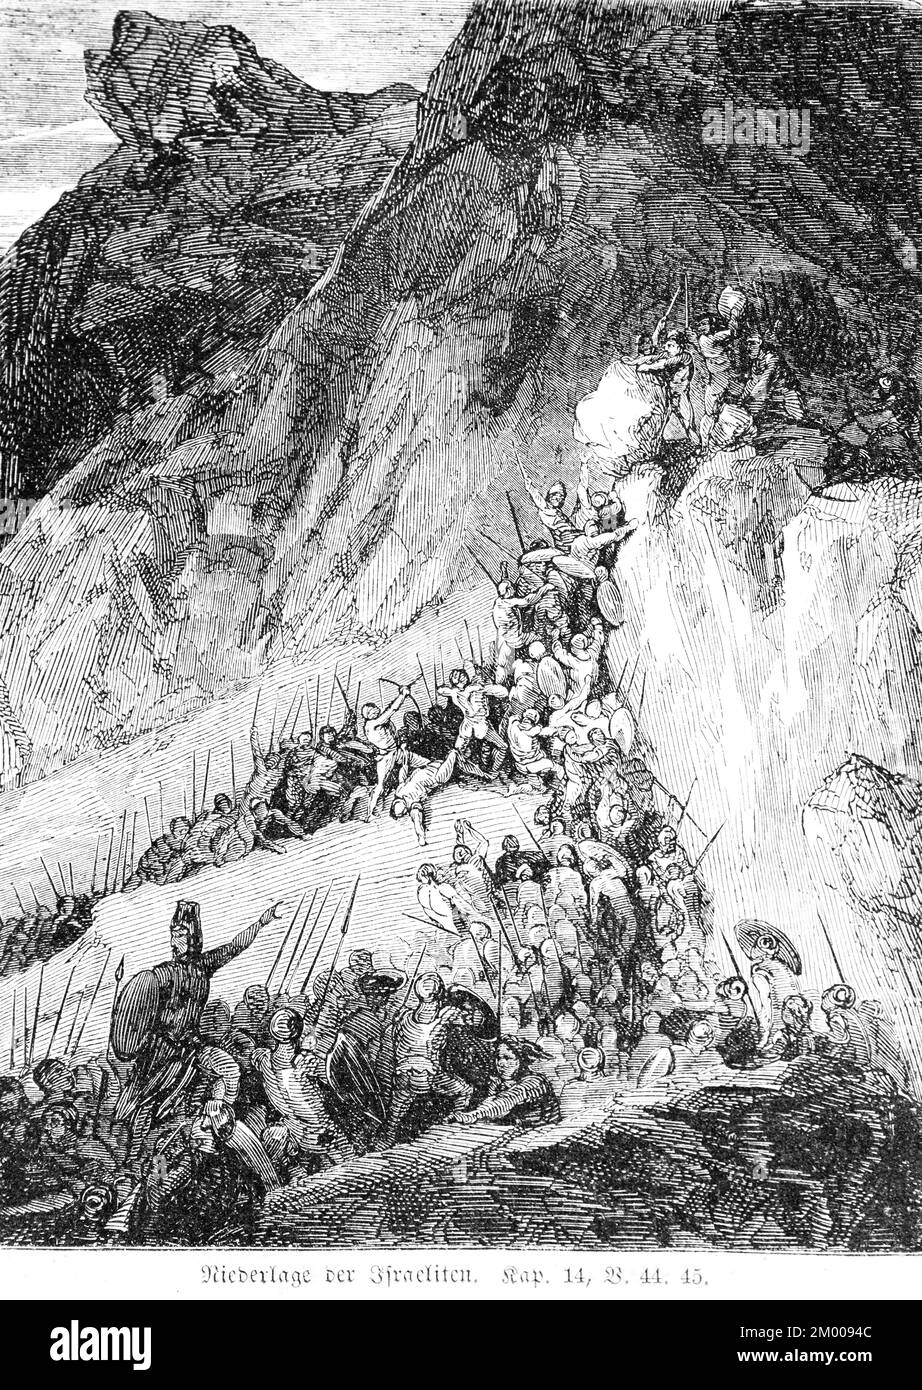 Defeat of the Israelites, warriors, crowd, battle, weapons, spears, Amorites, Cananites, Horma, Amorite Mountains, Khalasa, mountains, landscape, Old Stock Photo